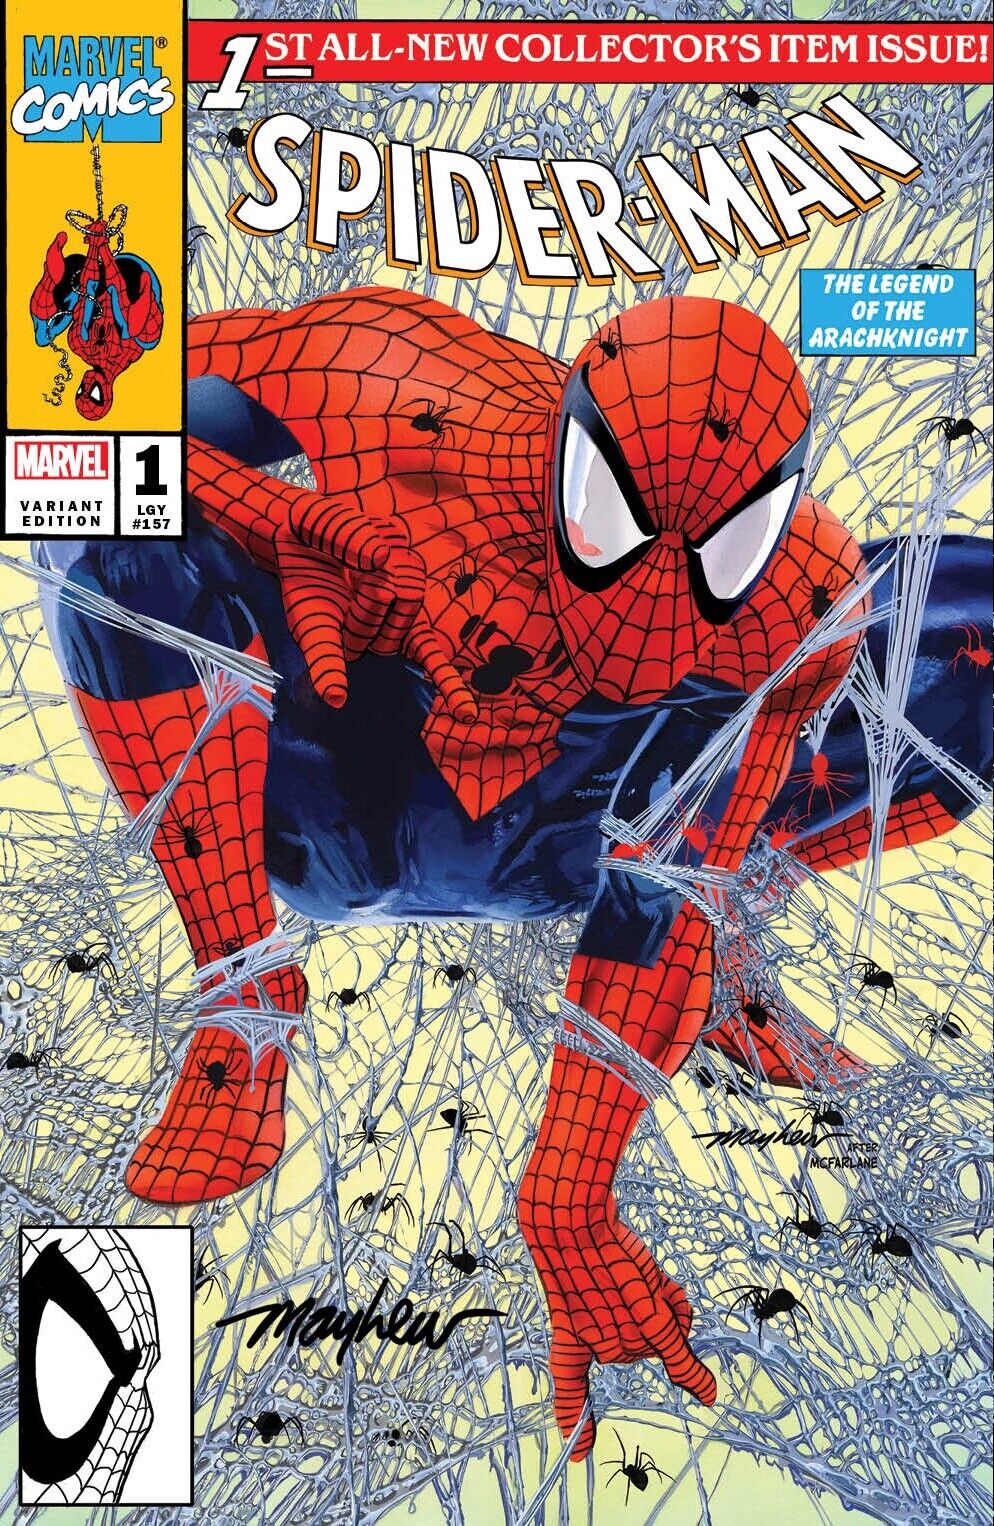 SPIDER-MAN #1 (2022) Mike Mayhew Studio Variant Cover A Trade Dress Signed COA